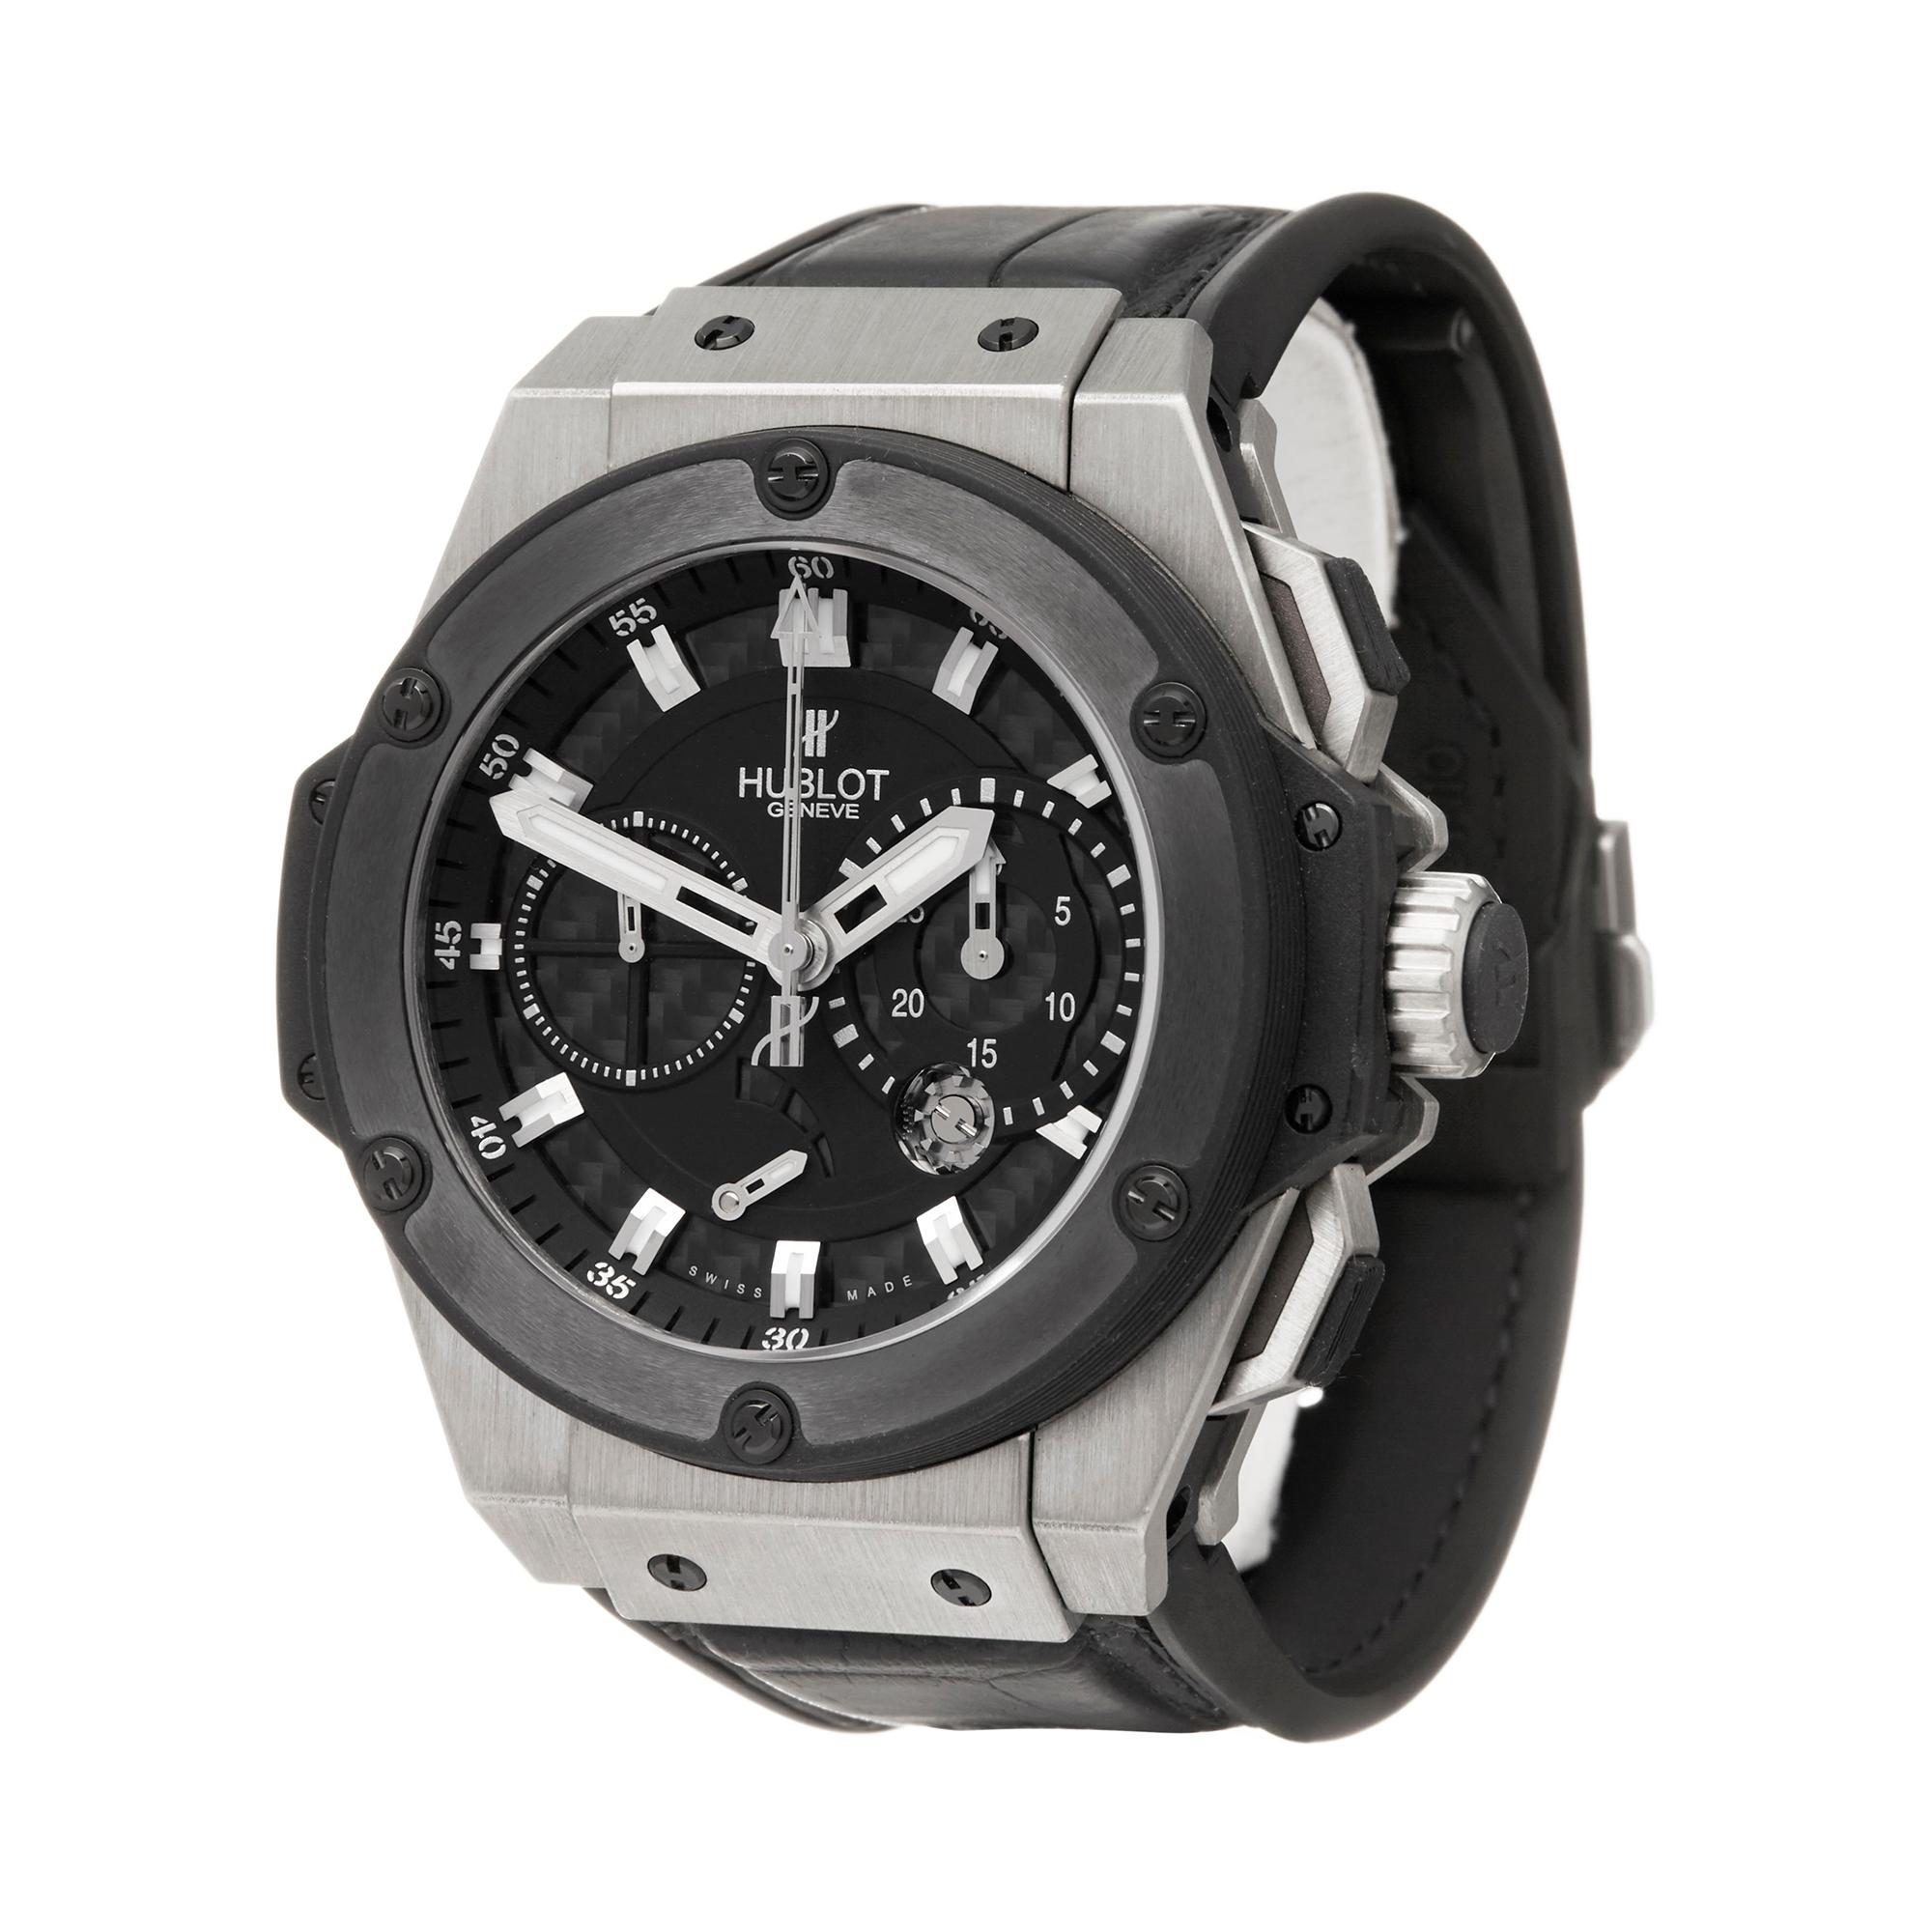 Ref: W5981
Manufacturer: Hublot
Model: King Power
Model Ref: 709.ZM.1780.RX
Age: Circa 2010's
Gender: Mens
Complete With: Presentation Box, Hublot Service Pouch And Service Papers Dated 8th April 2019
Dial: Carbon Fibre Baton
Glass: Sapphire